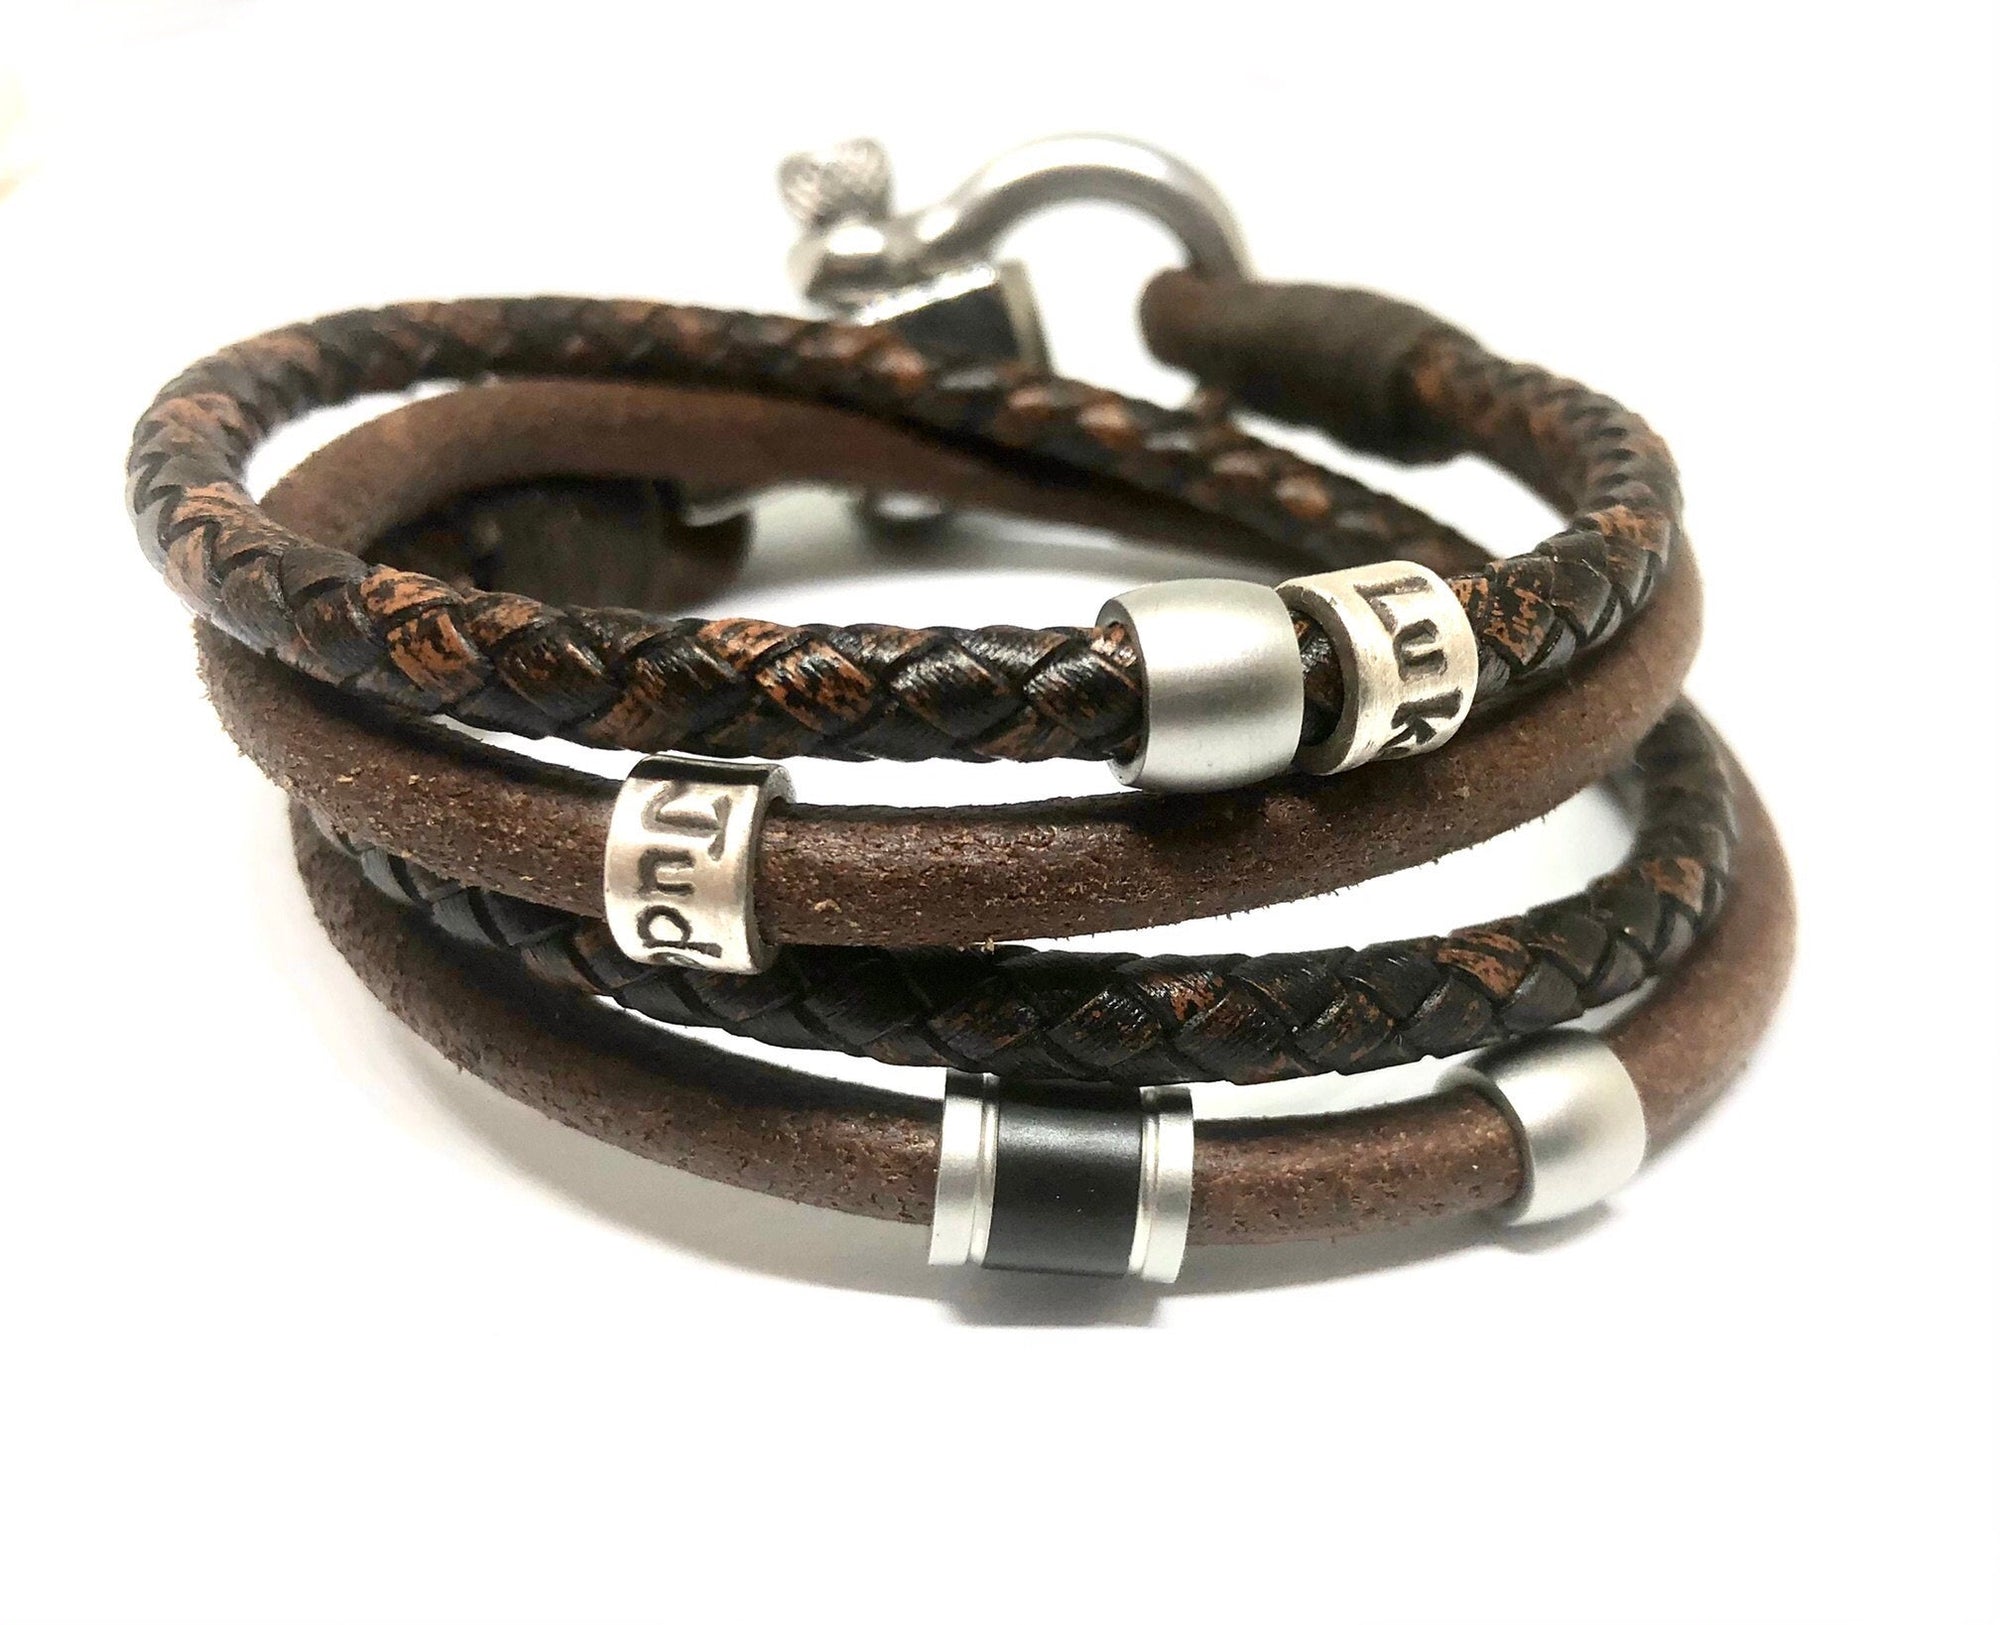 ADD-ON Silver Accessory Beads for Mens Leather Bracelet, Cremation Jewelry for Men and Women, Mens Bracelet Personalized, Wrap Bracelet